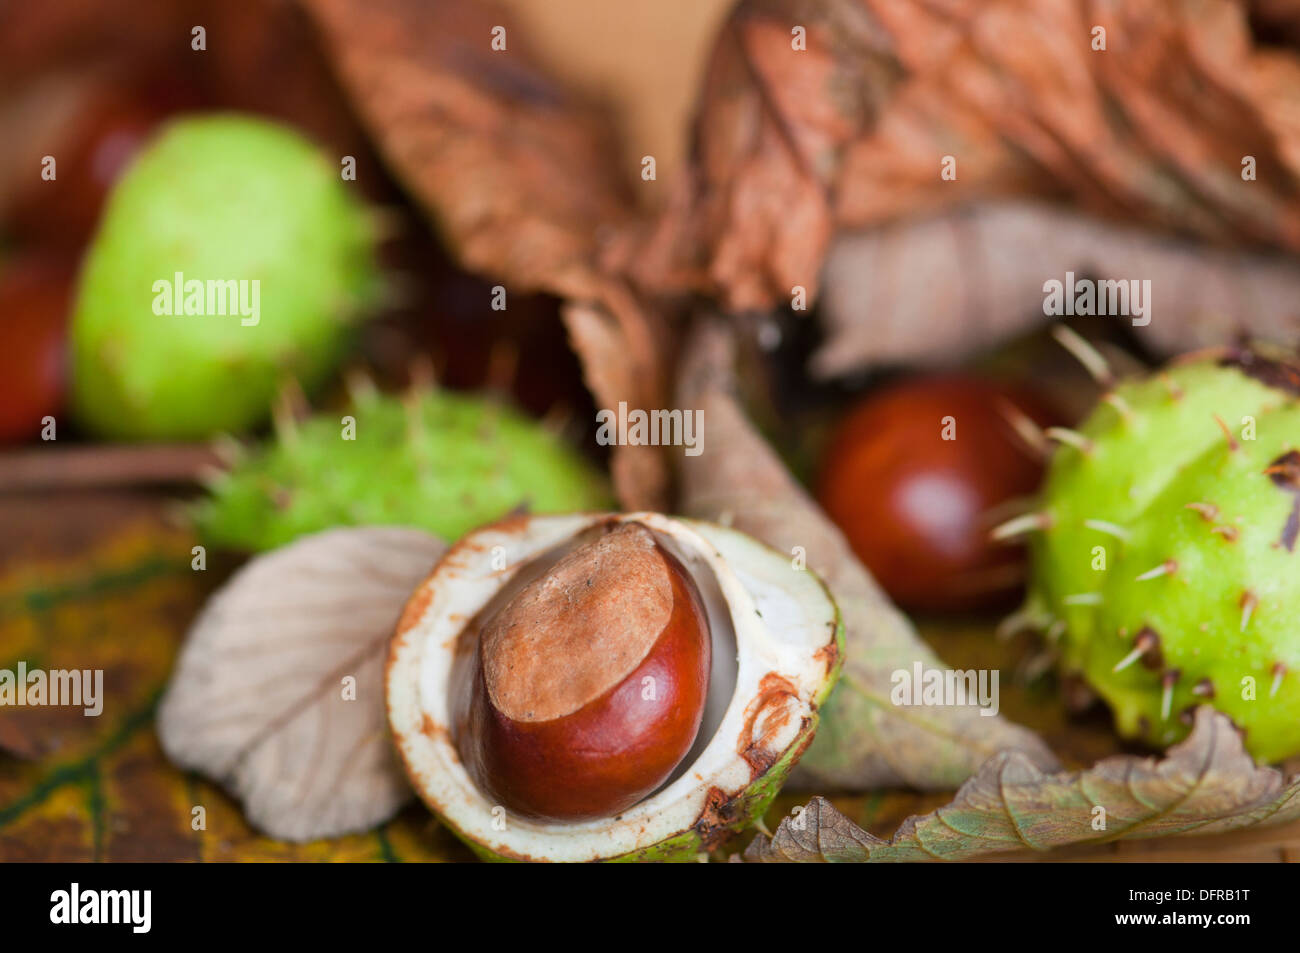 Conkers from the horse chestnut tree on a covering of fallen leaves. Stock Photo